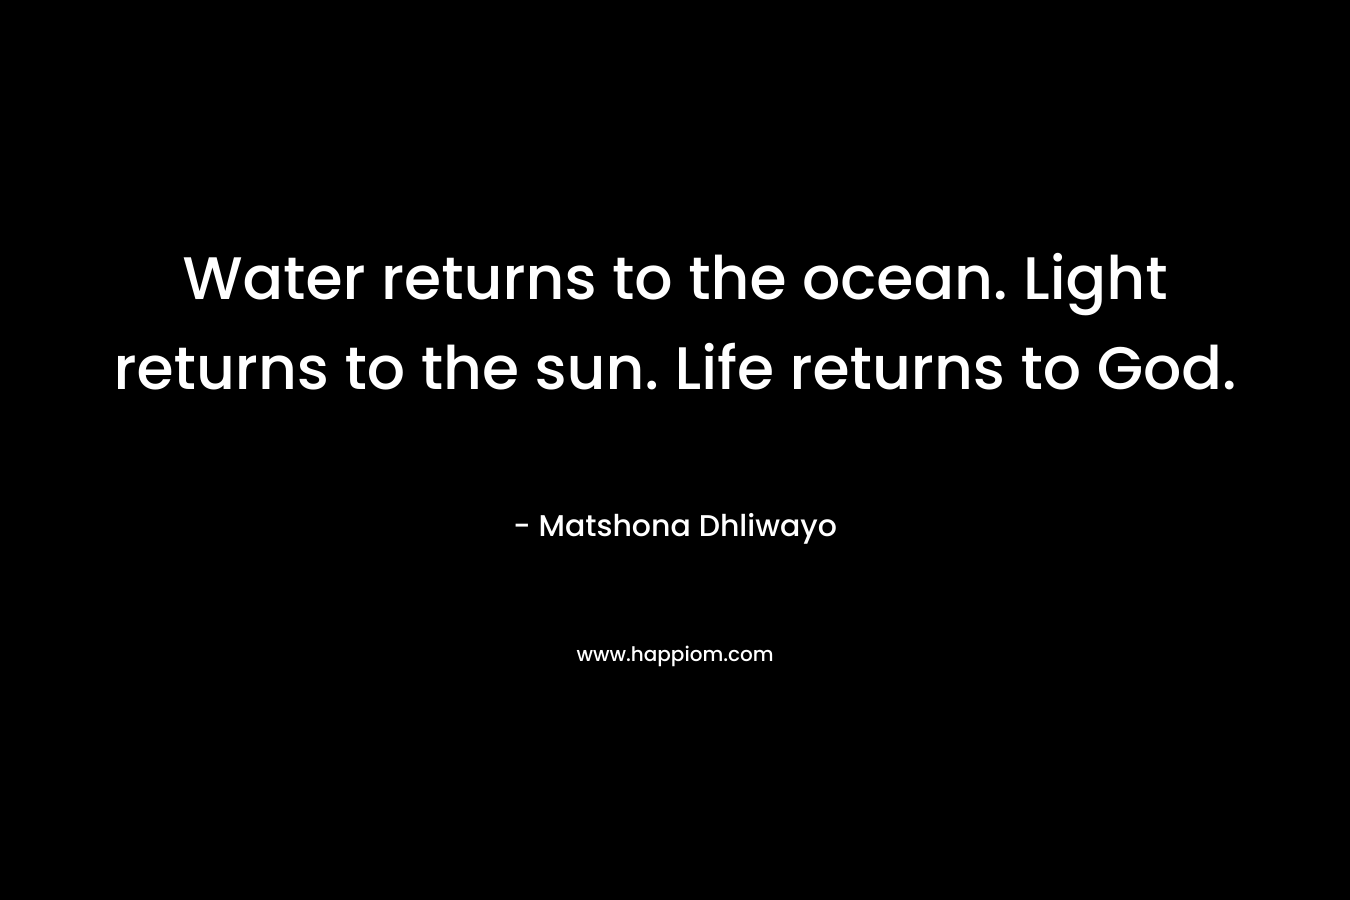 Water returns to the ocean. Light returns to the sun. Life returns to God.